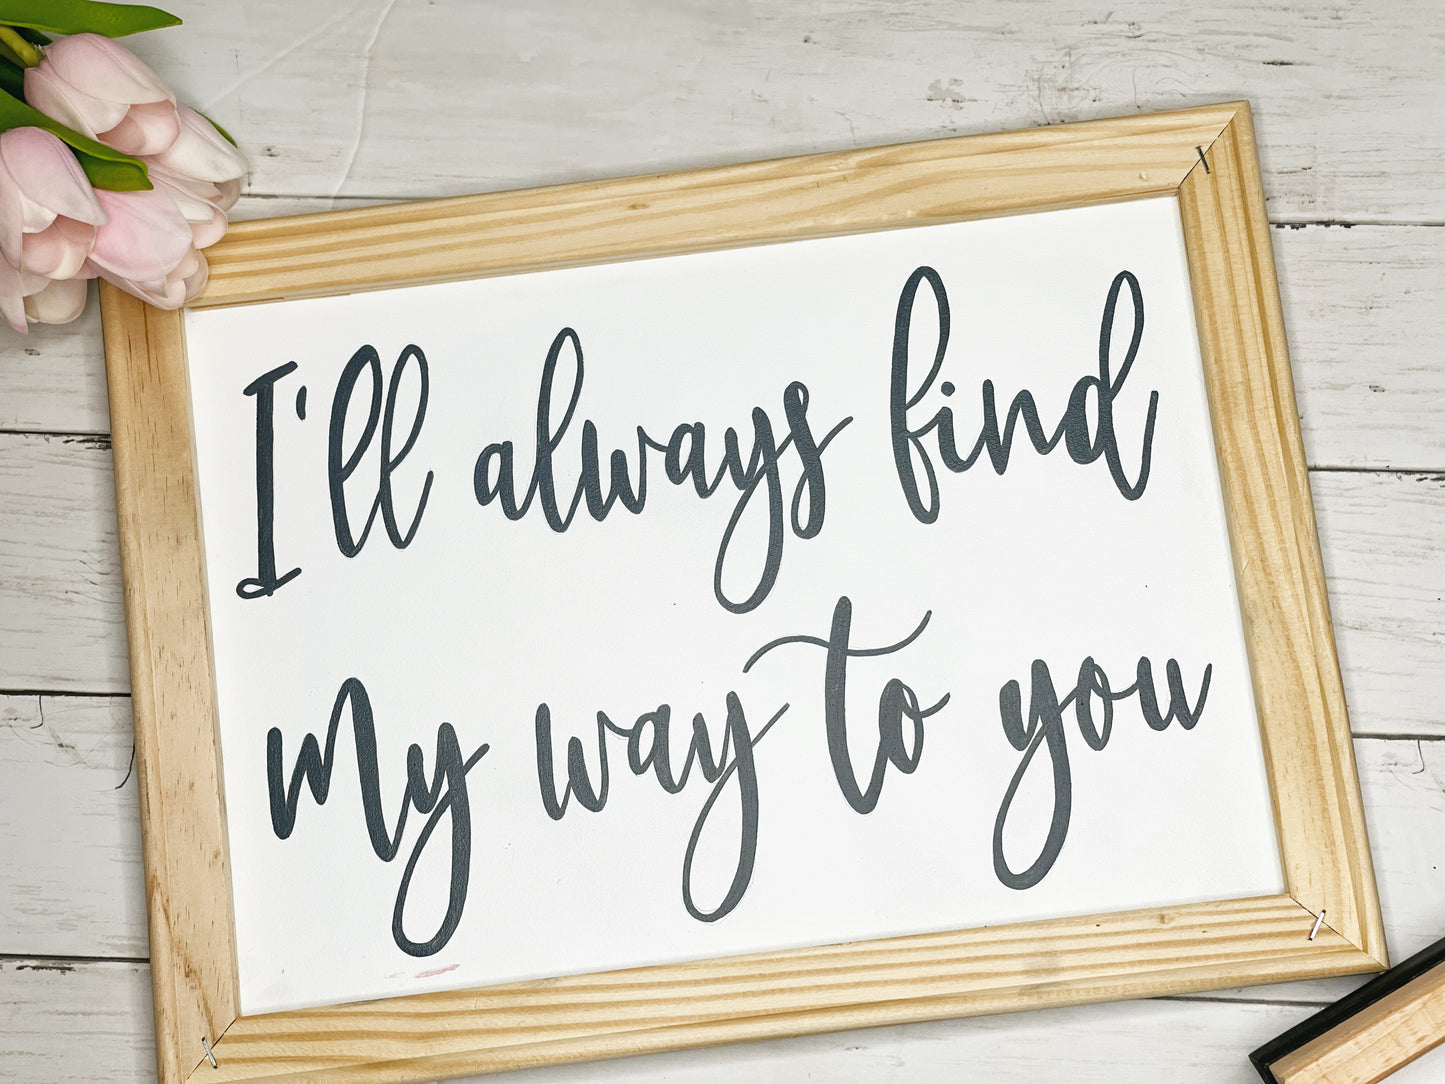 My Way to You - Framed sign (PRE-ORDER)